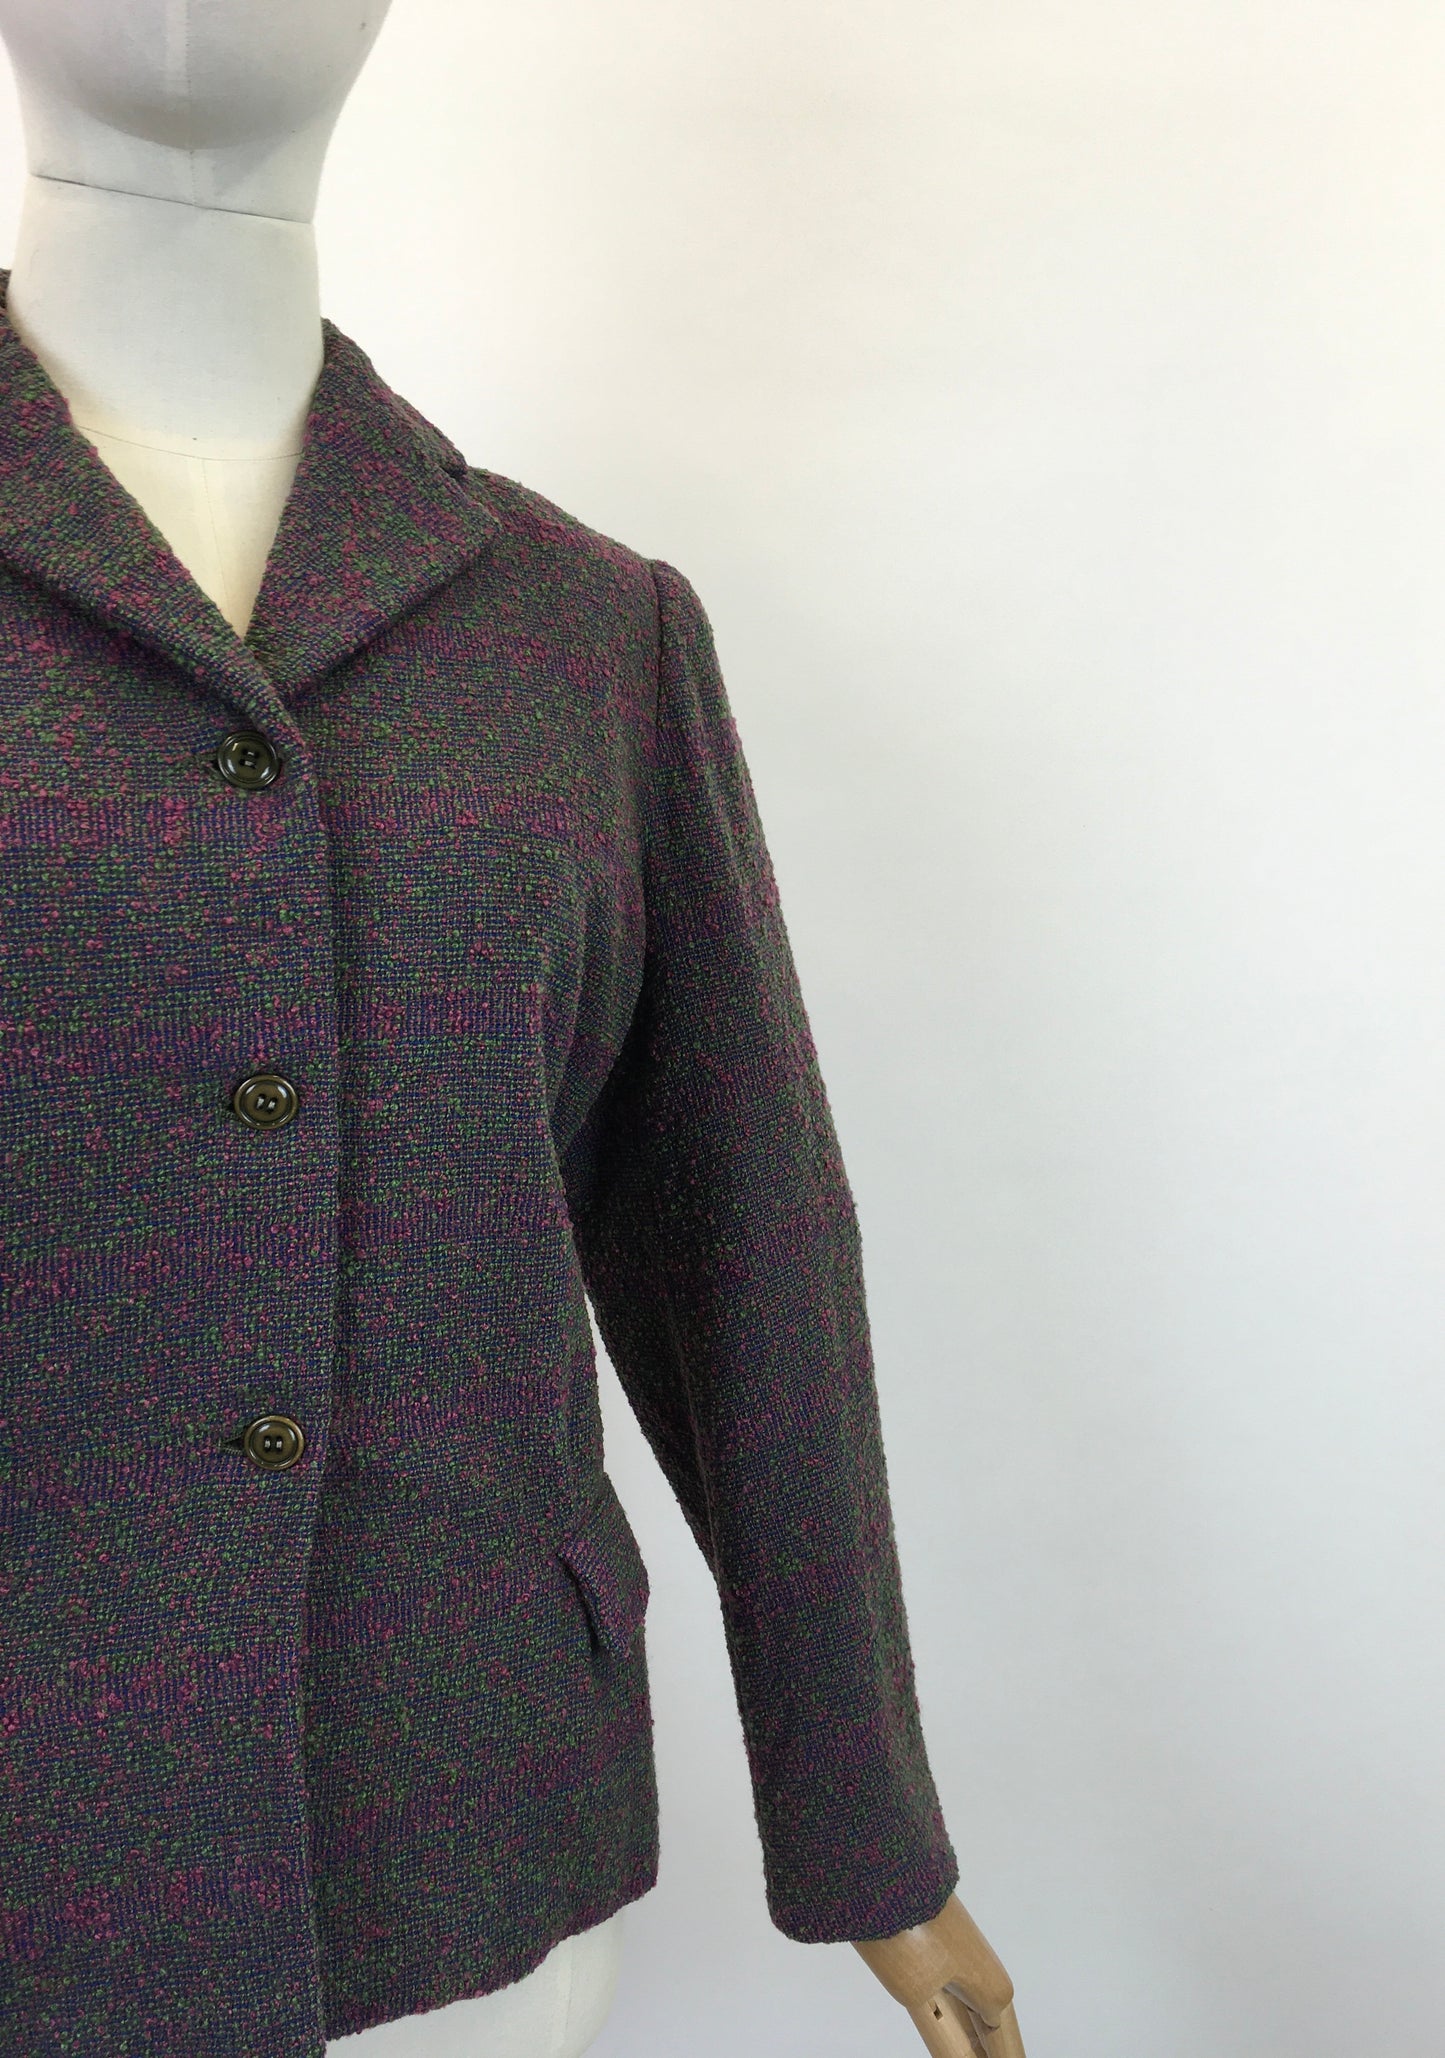 Original 1950's Fabulous Hebe Sports Jacket - In Purples and Greens